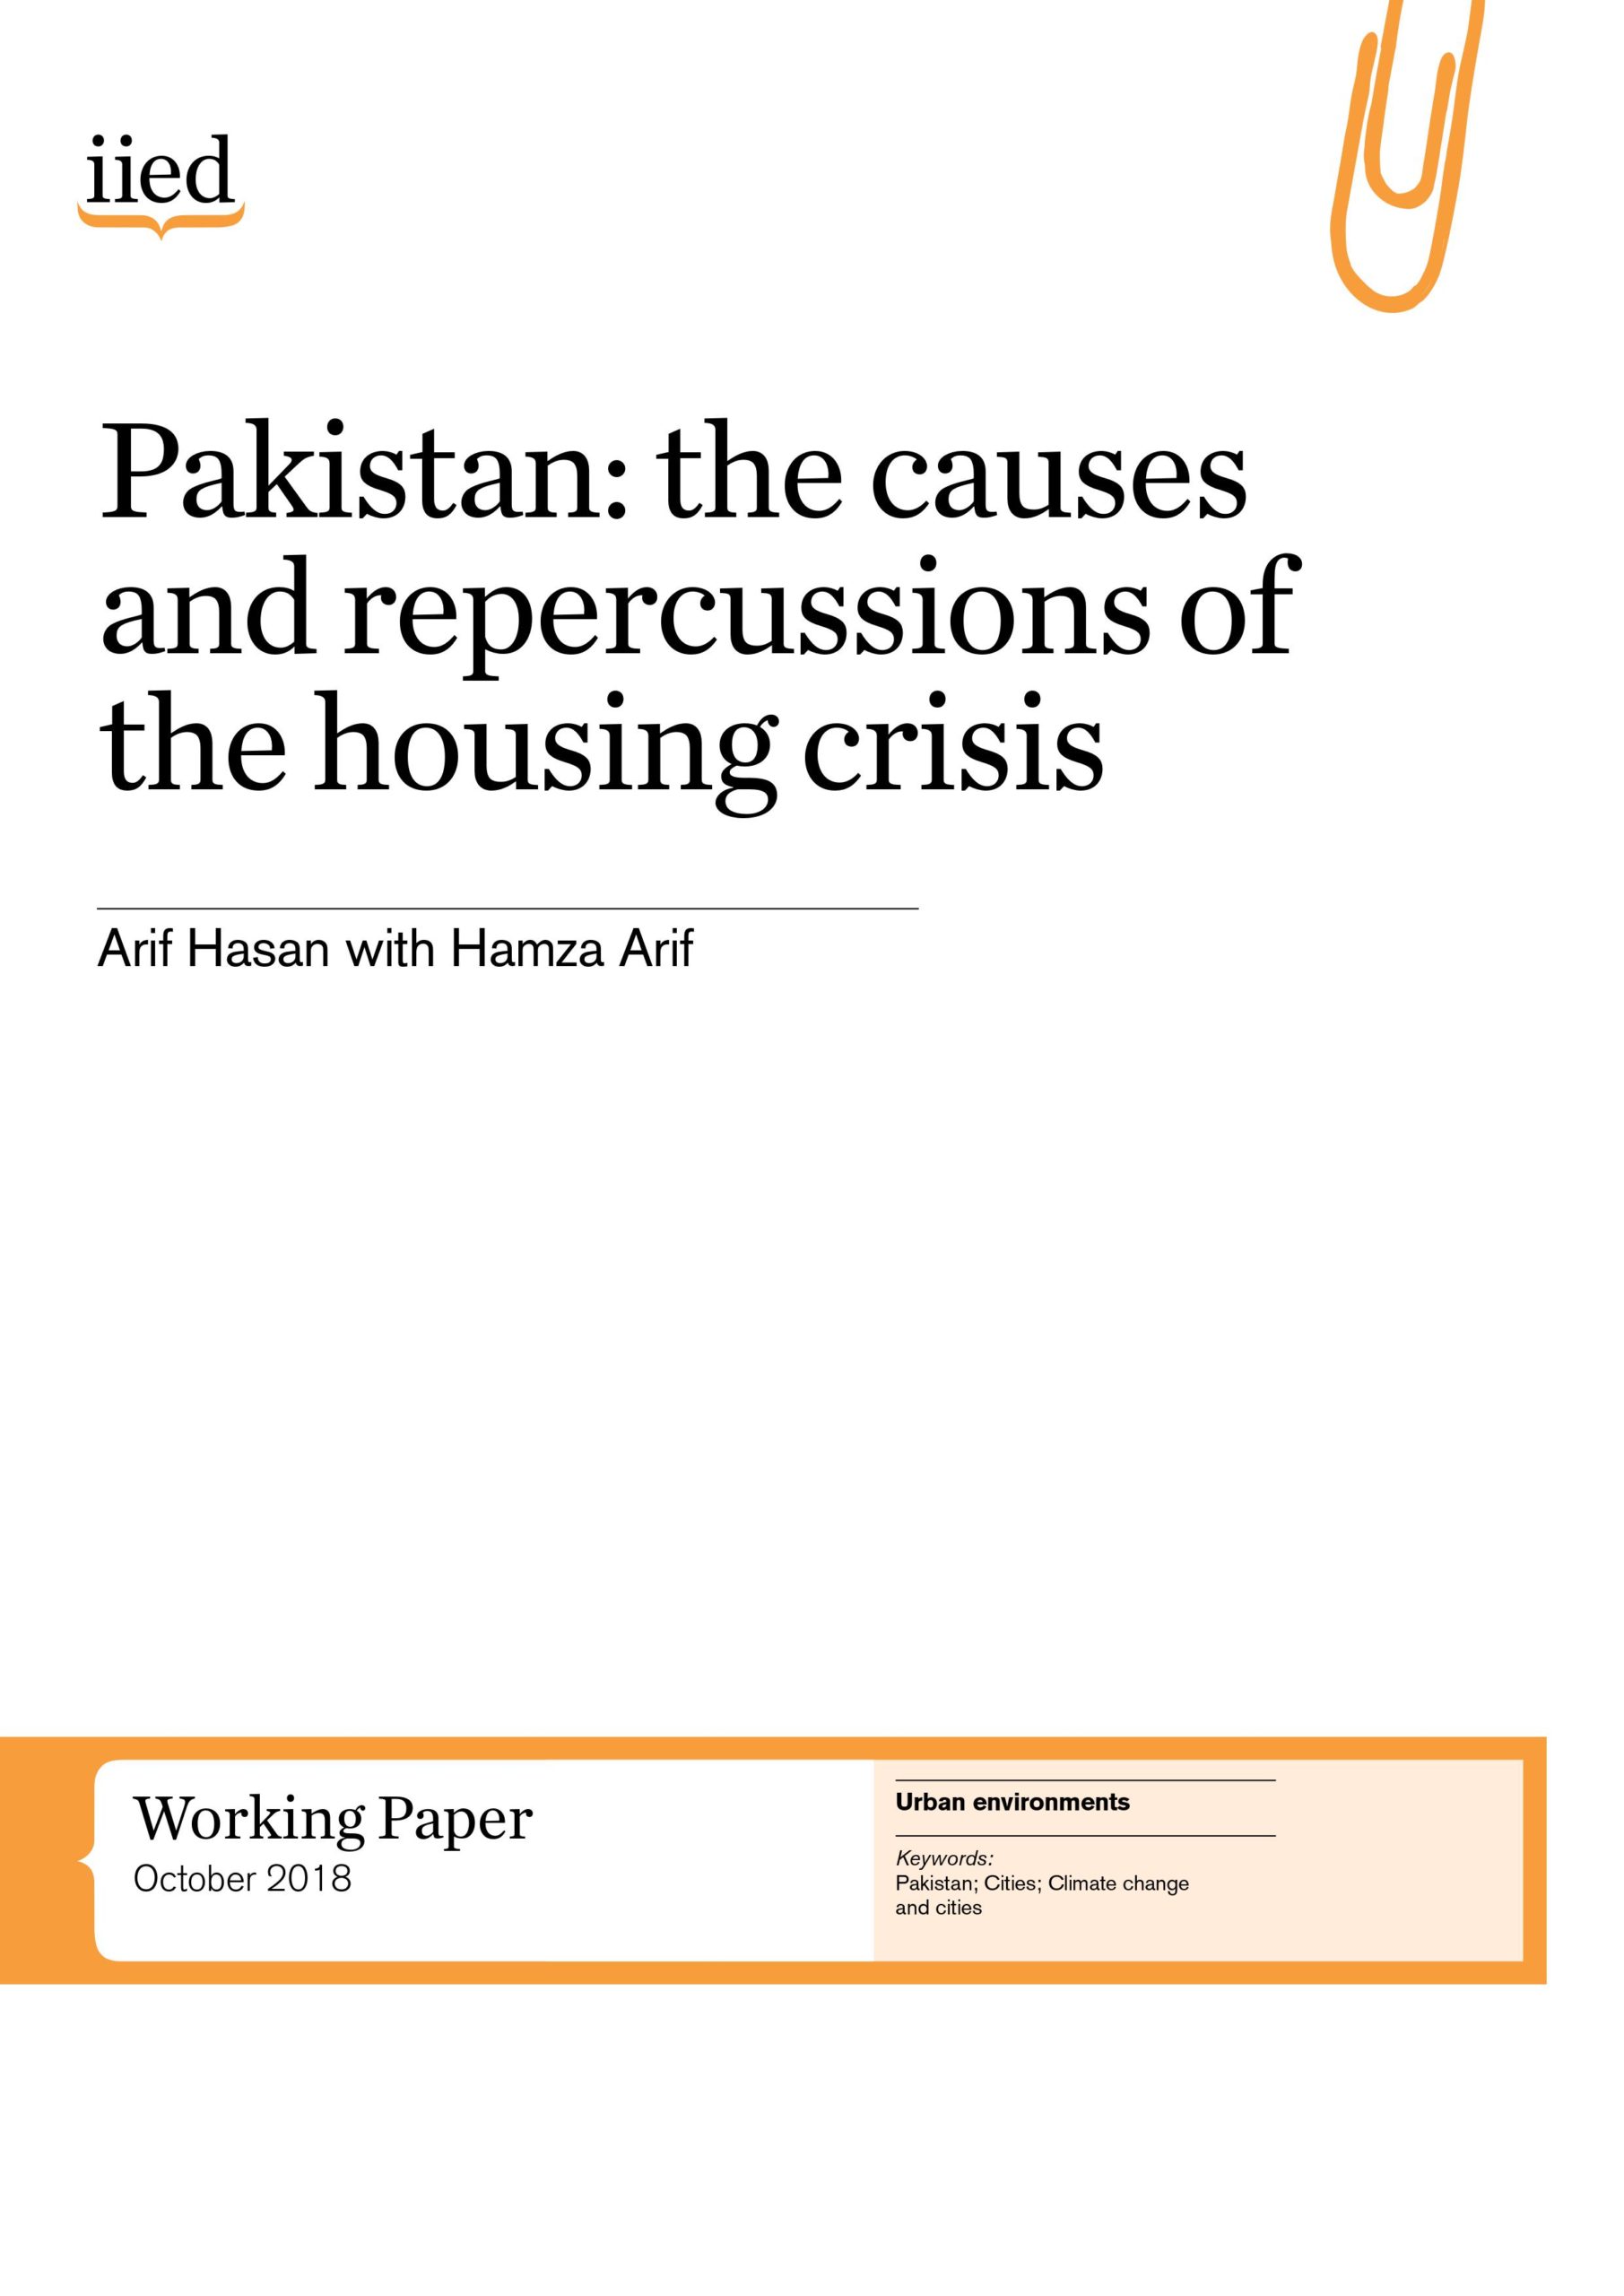 Pakistan: The Causes and Repercussions of the Housing Crisis